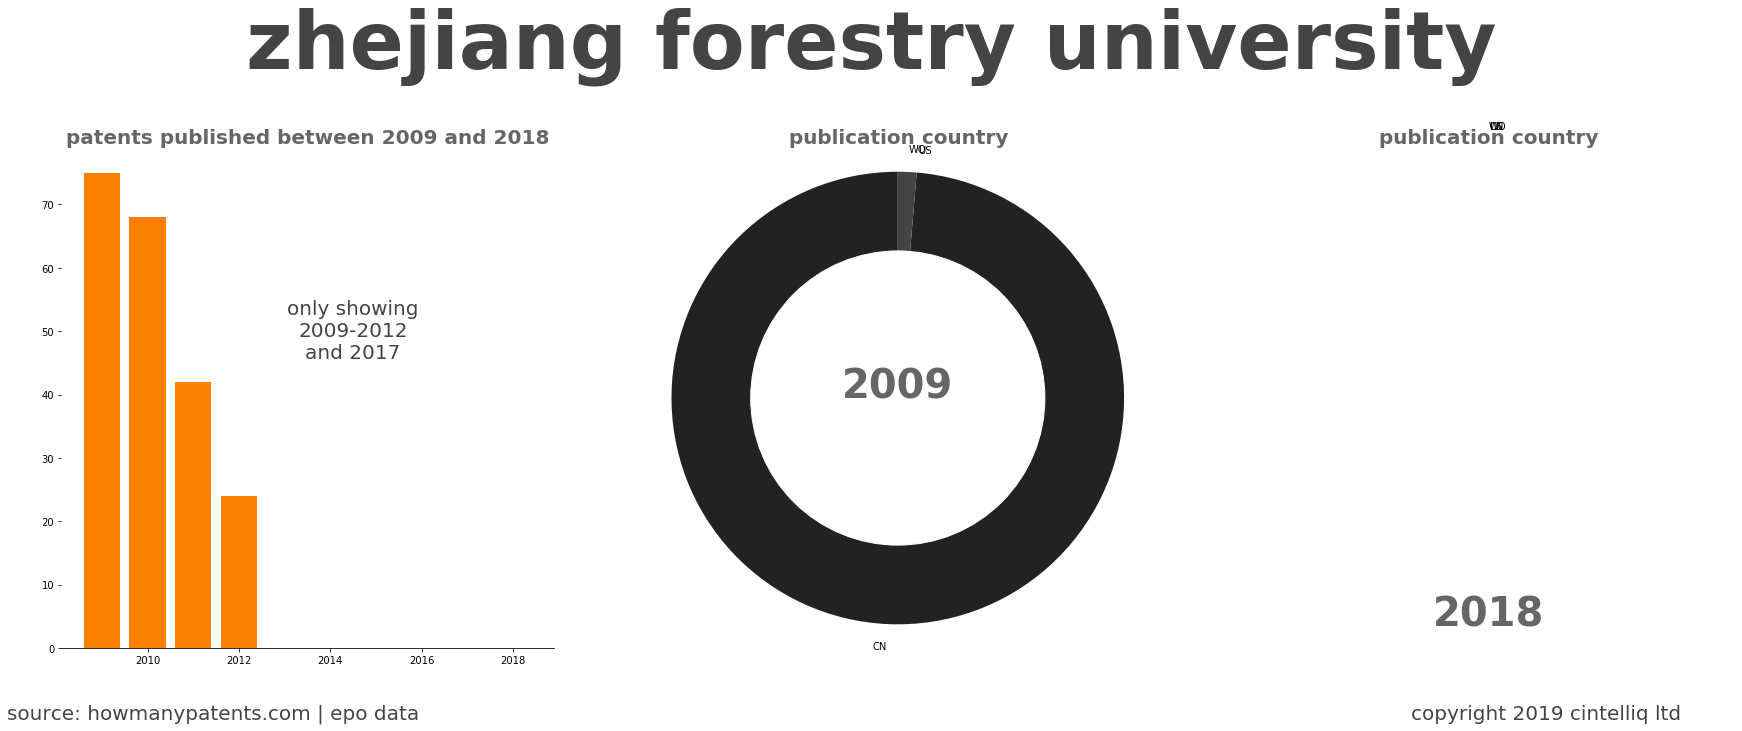 summary of patents for Zhejiang Forestry University